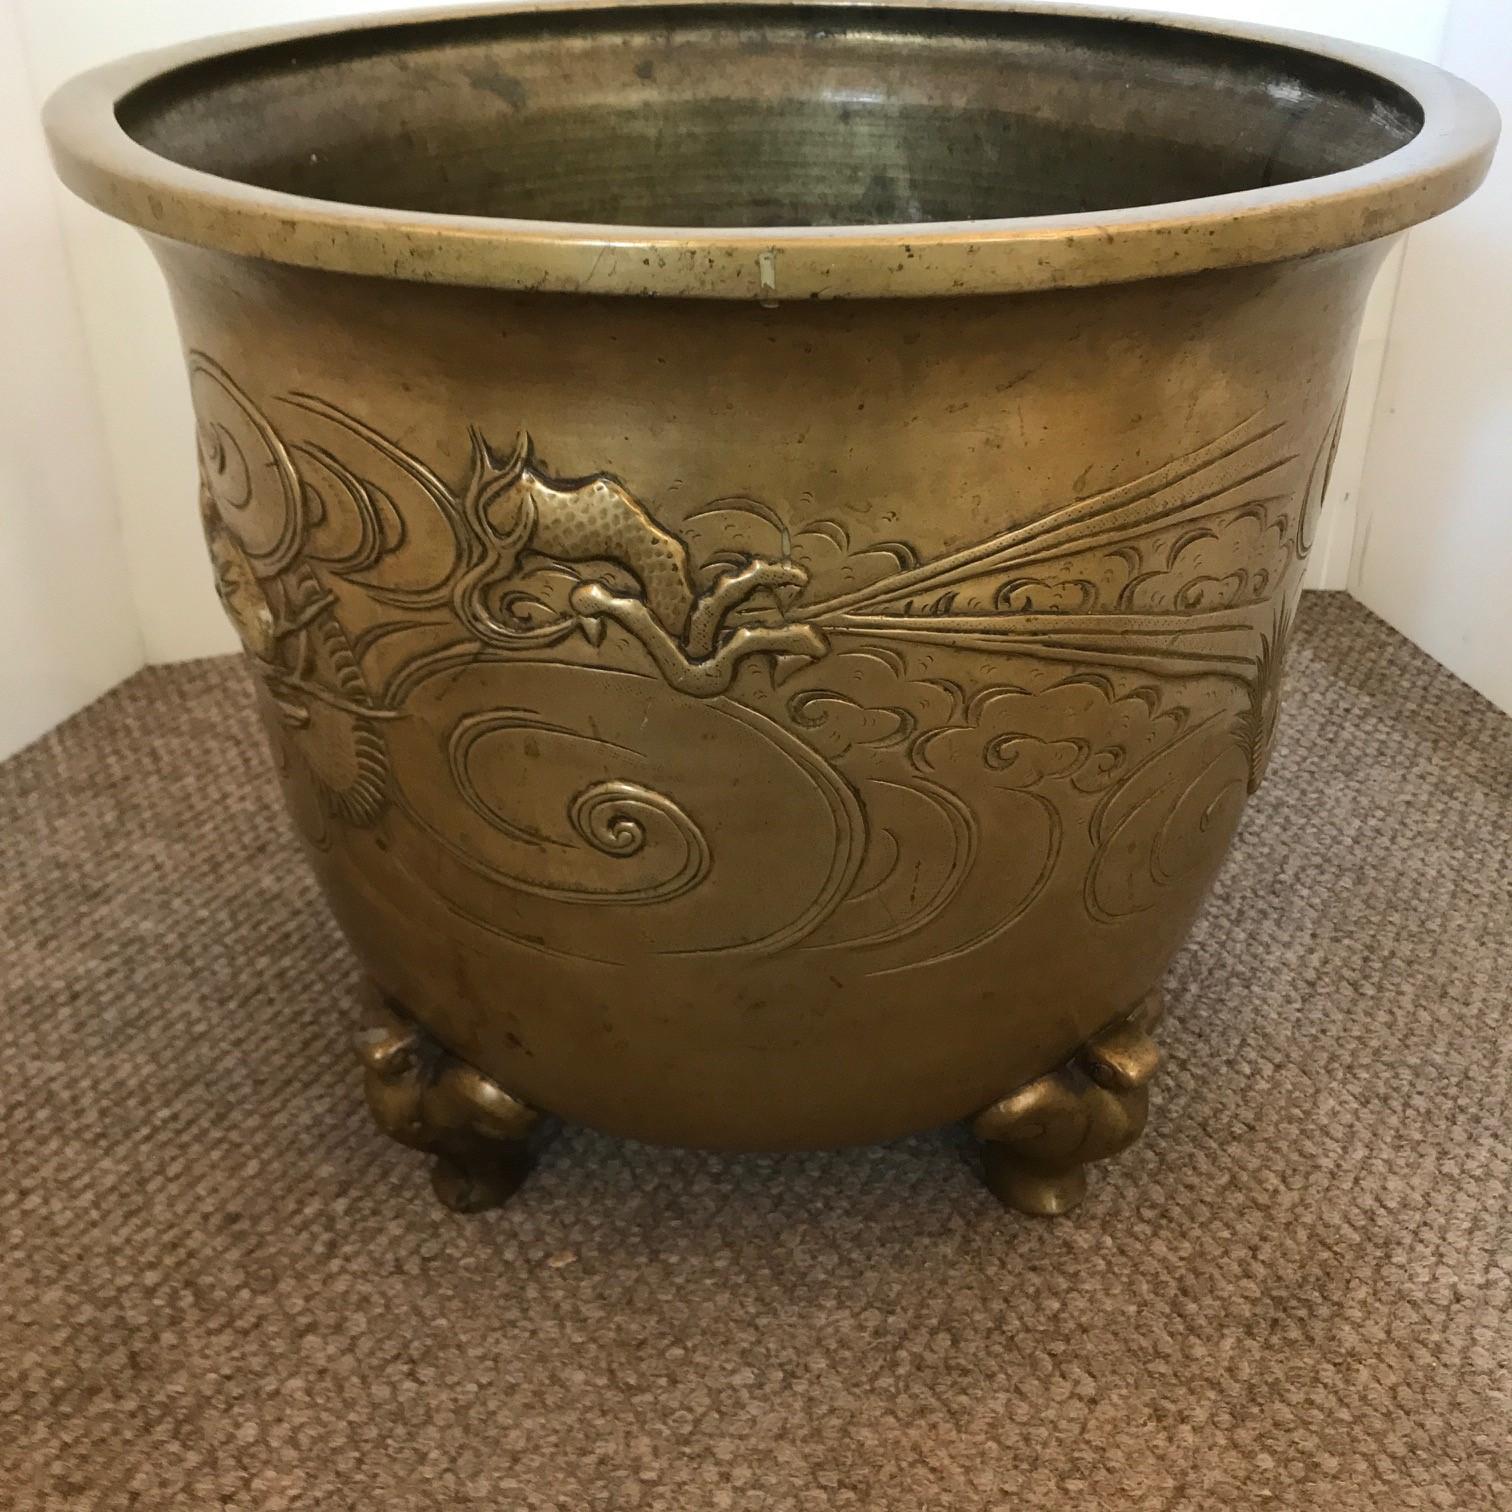 This handsome vessel is decorated with a bas-relief of dragons disputing a flaming pearl, the feet are modelled as a stylised bird (or possibly a stylised elephant)  The rim is inverted and flattened to aid in food preparation.

This vessel was a